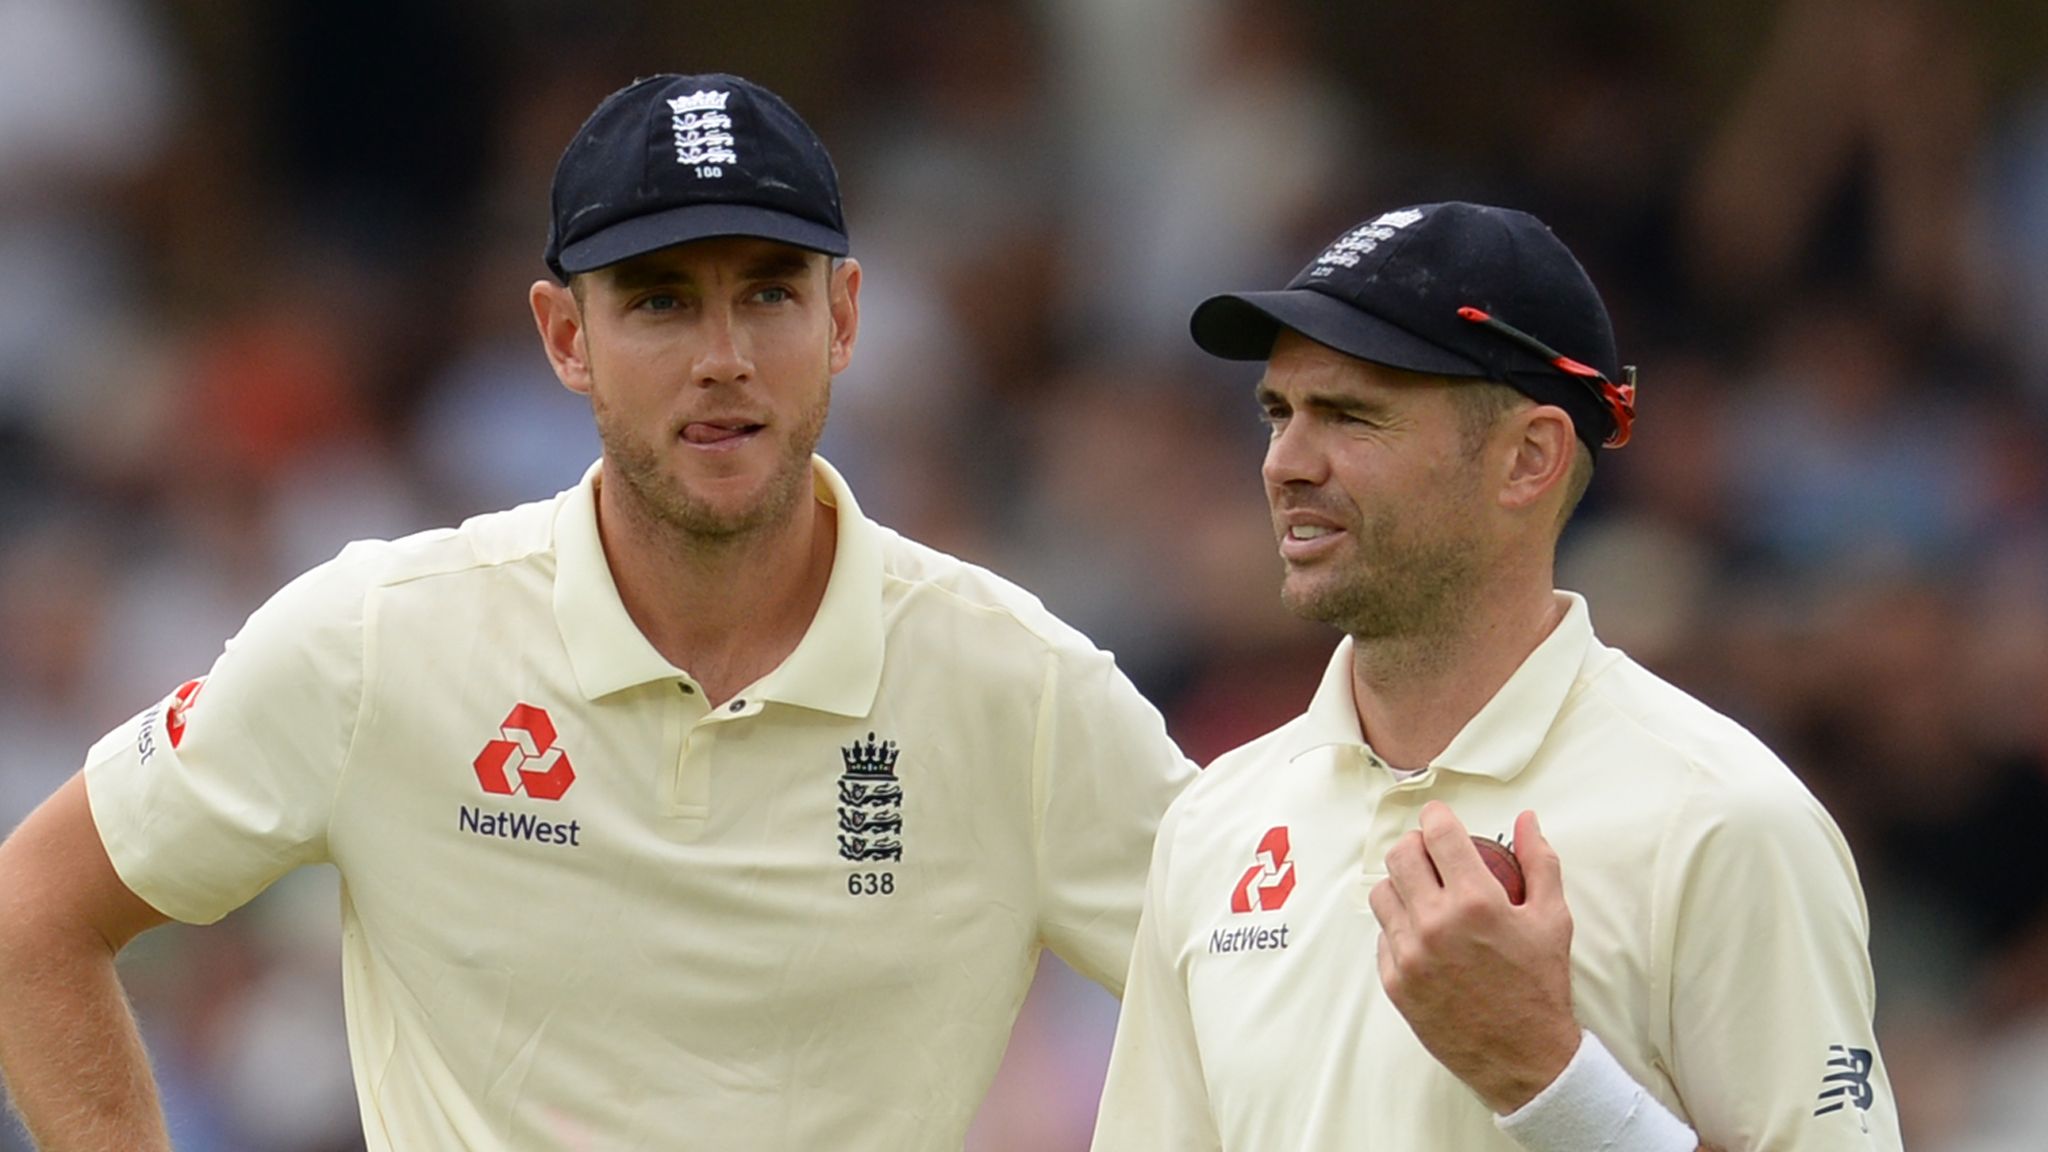 James Anderson and Stuart Broad eye one last Ashes series in Australia | Cricket News | Sky Sports